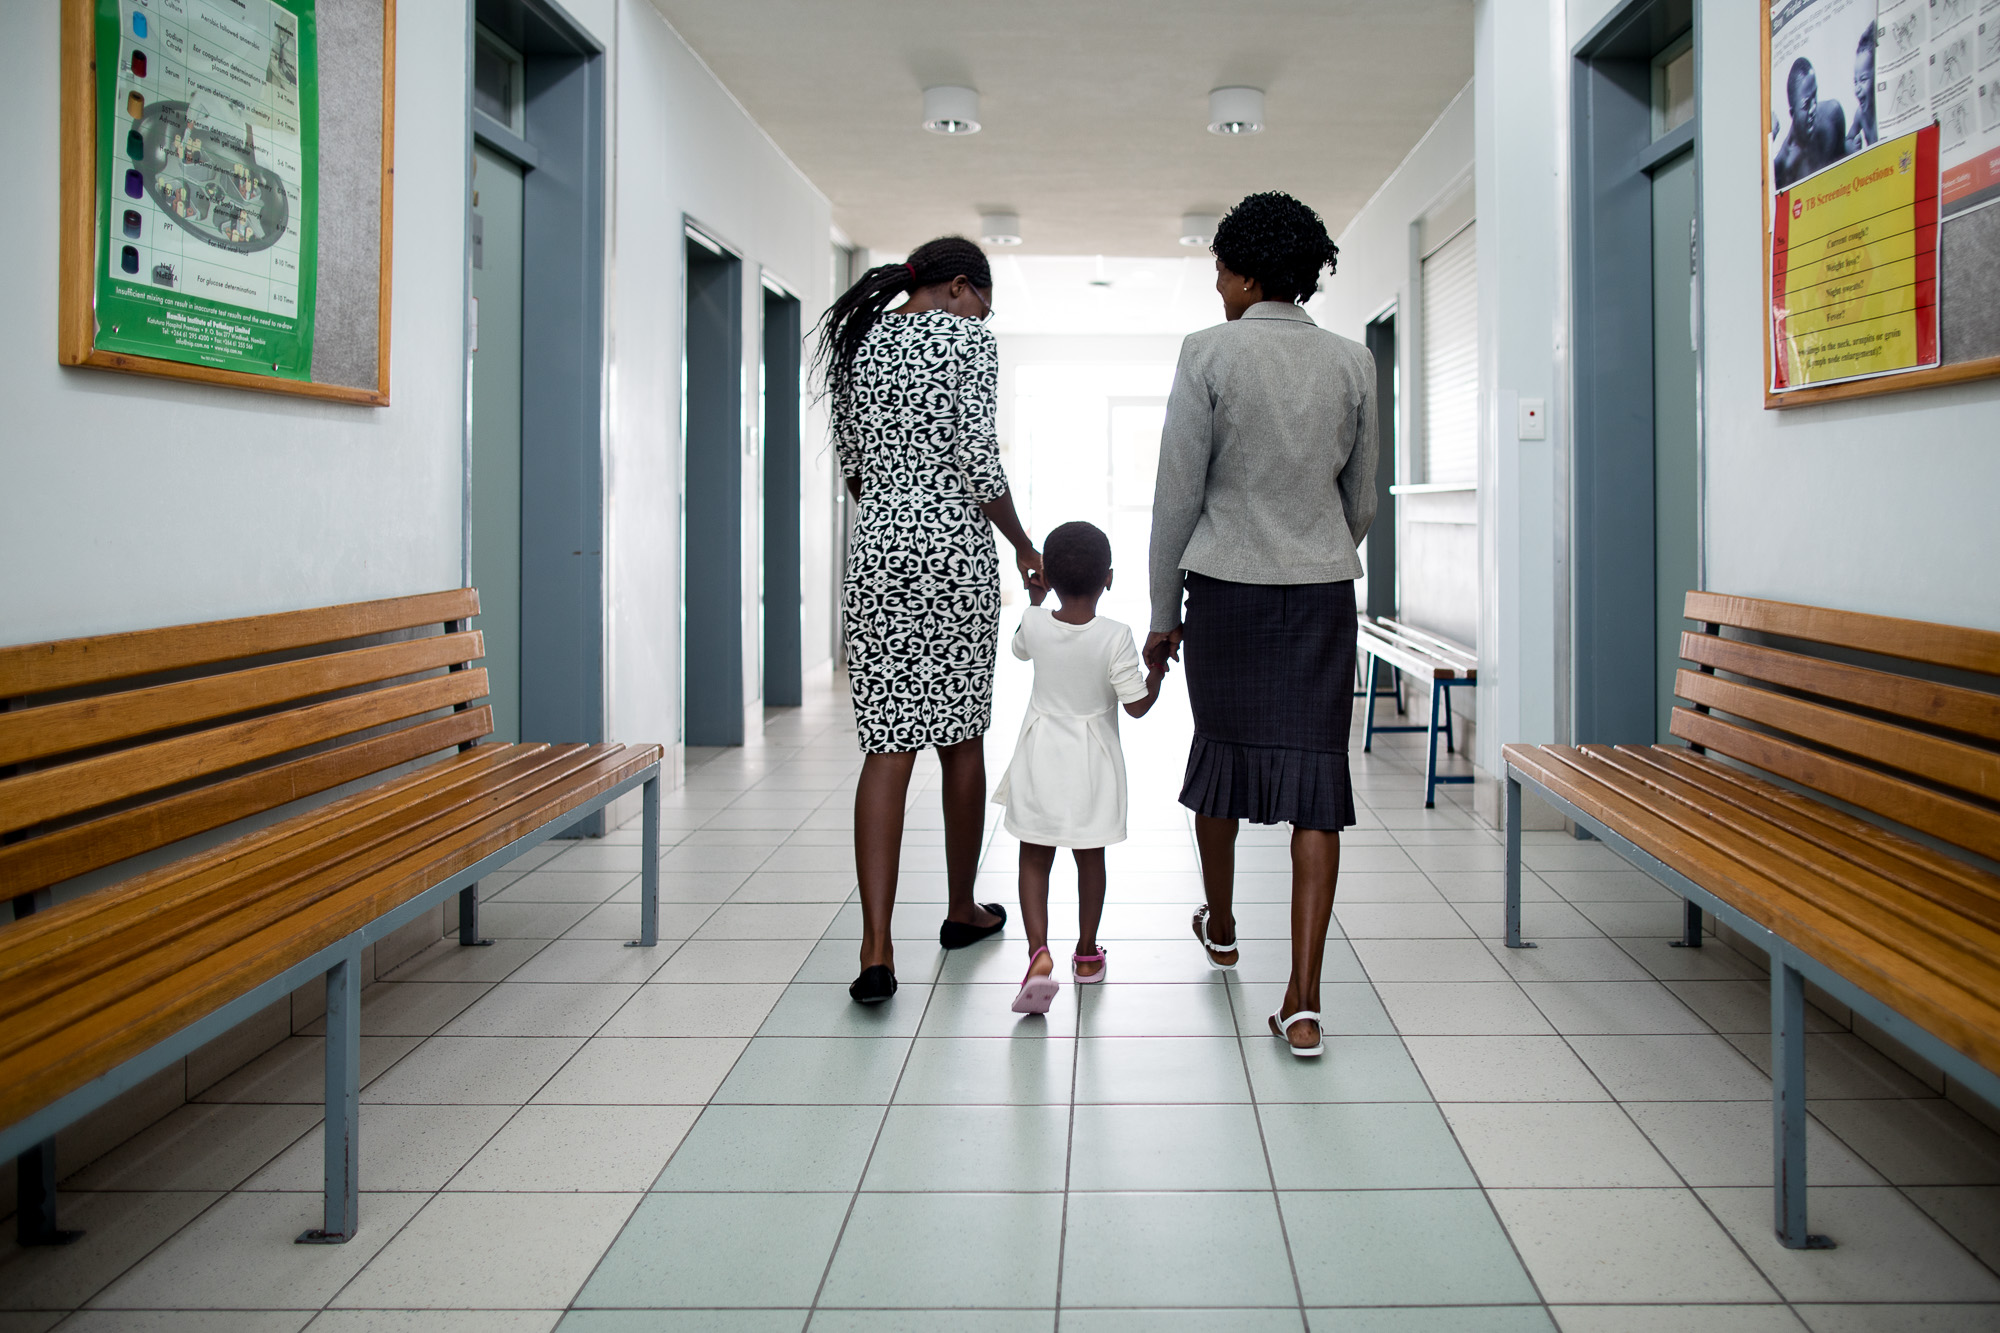  Loide Iikuyu, right, with her daughters Loide (left) and Selma. When the younger Loide was 10 years old, her mother explained to her how and why she came to be HIV-positive. “I told her it was because of mother-to-child transmission,” the elder Loid